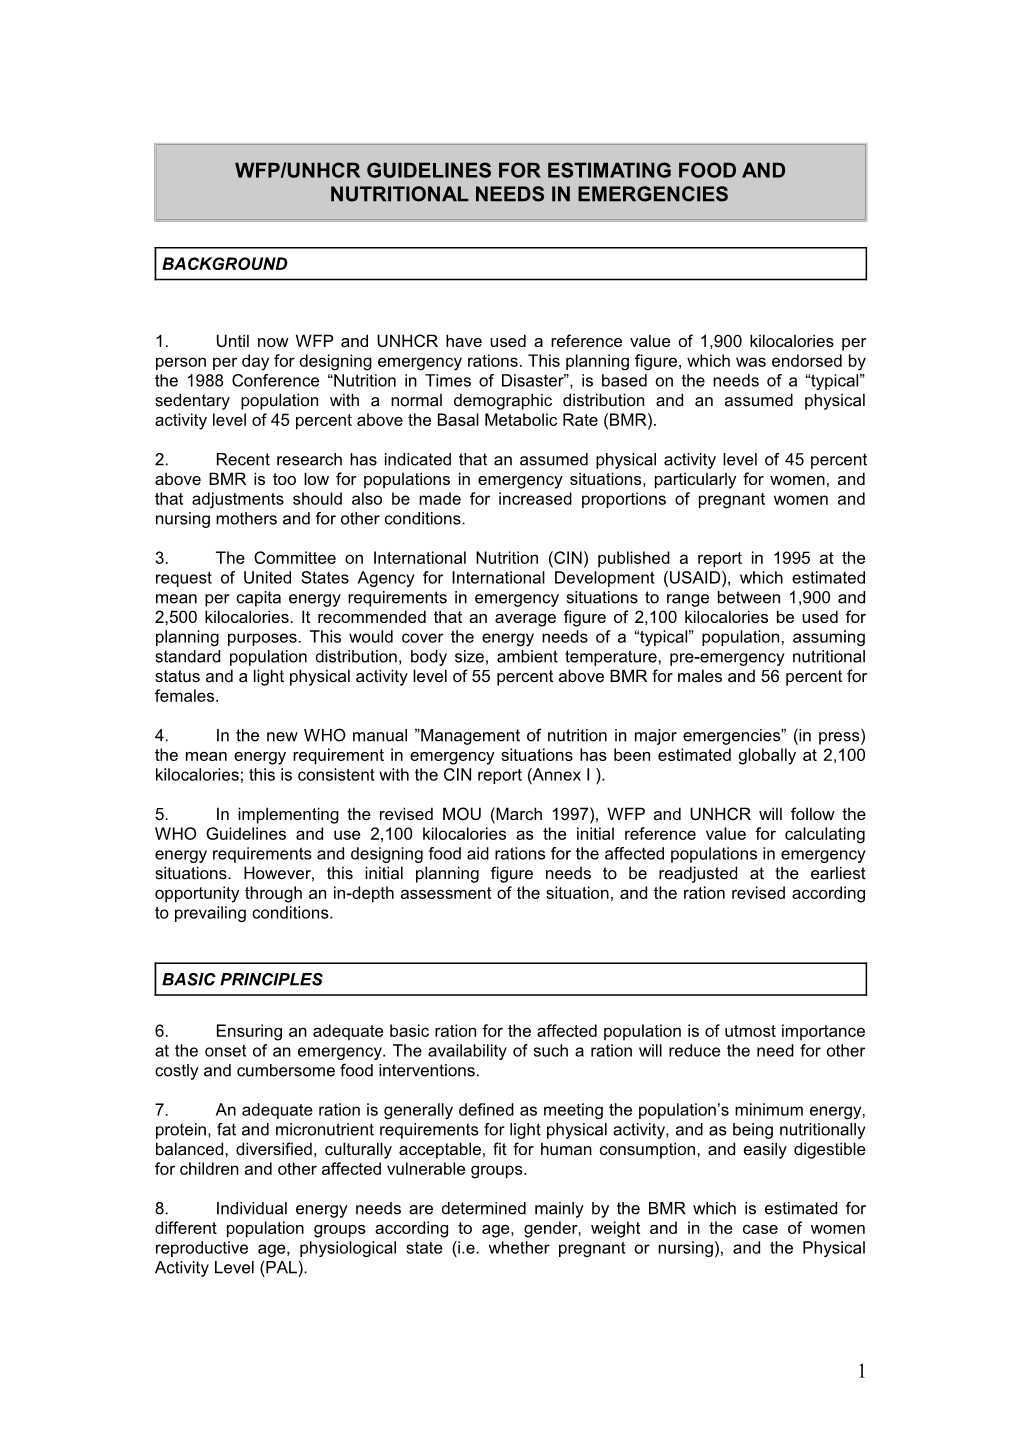 Guidelines for Estimating Food Requirement in Refugee and Internally Displaced Situation